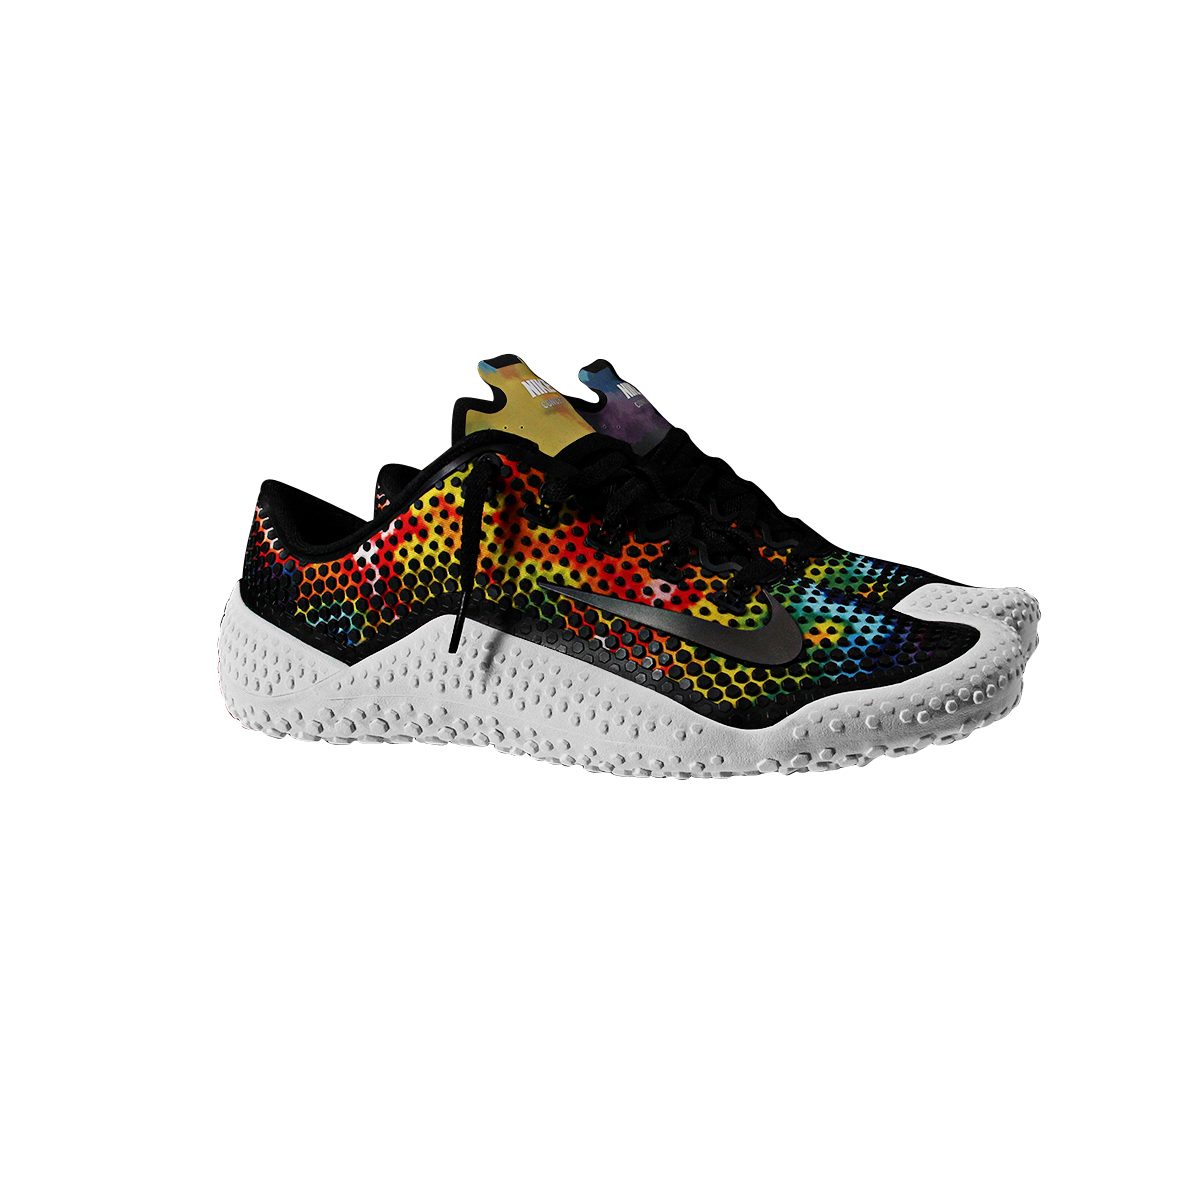 Concepts x Nike Free Trainer 1.0 NFREETR1040